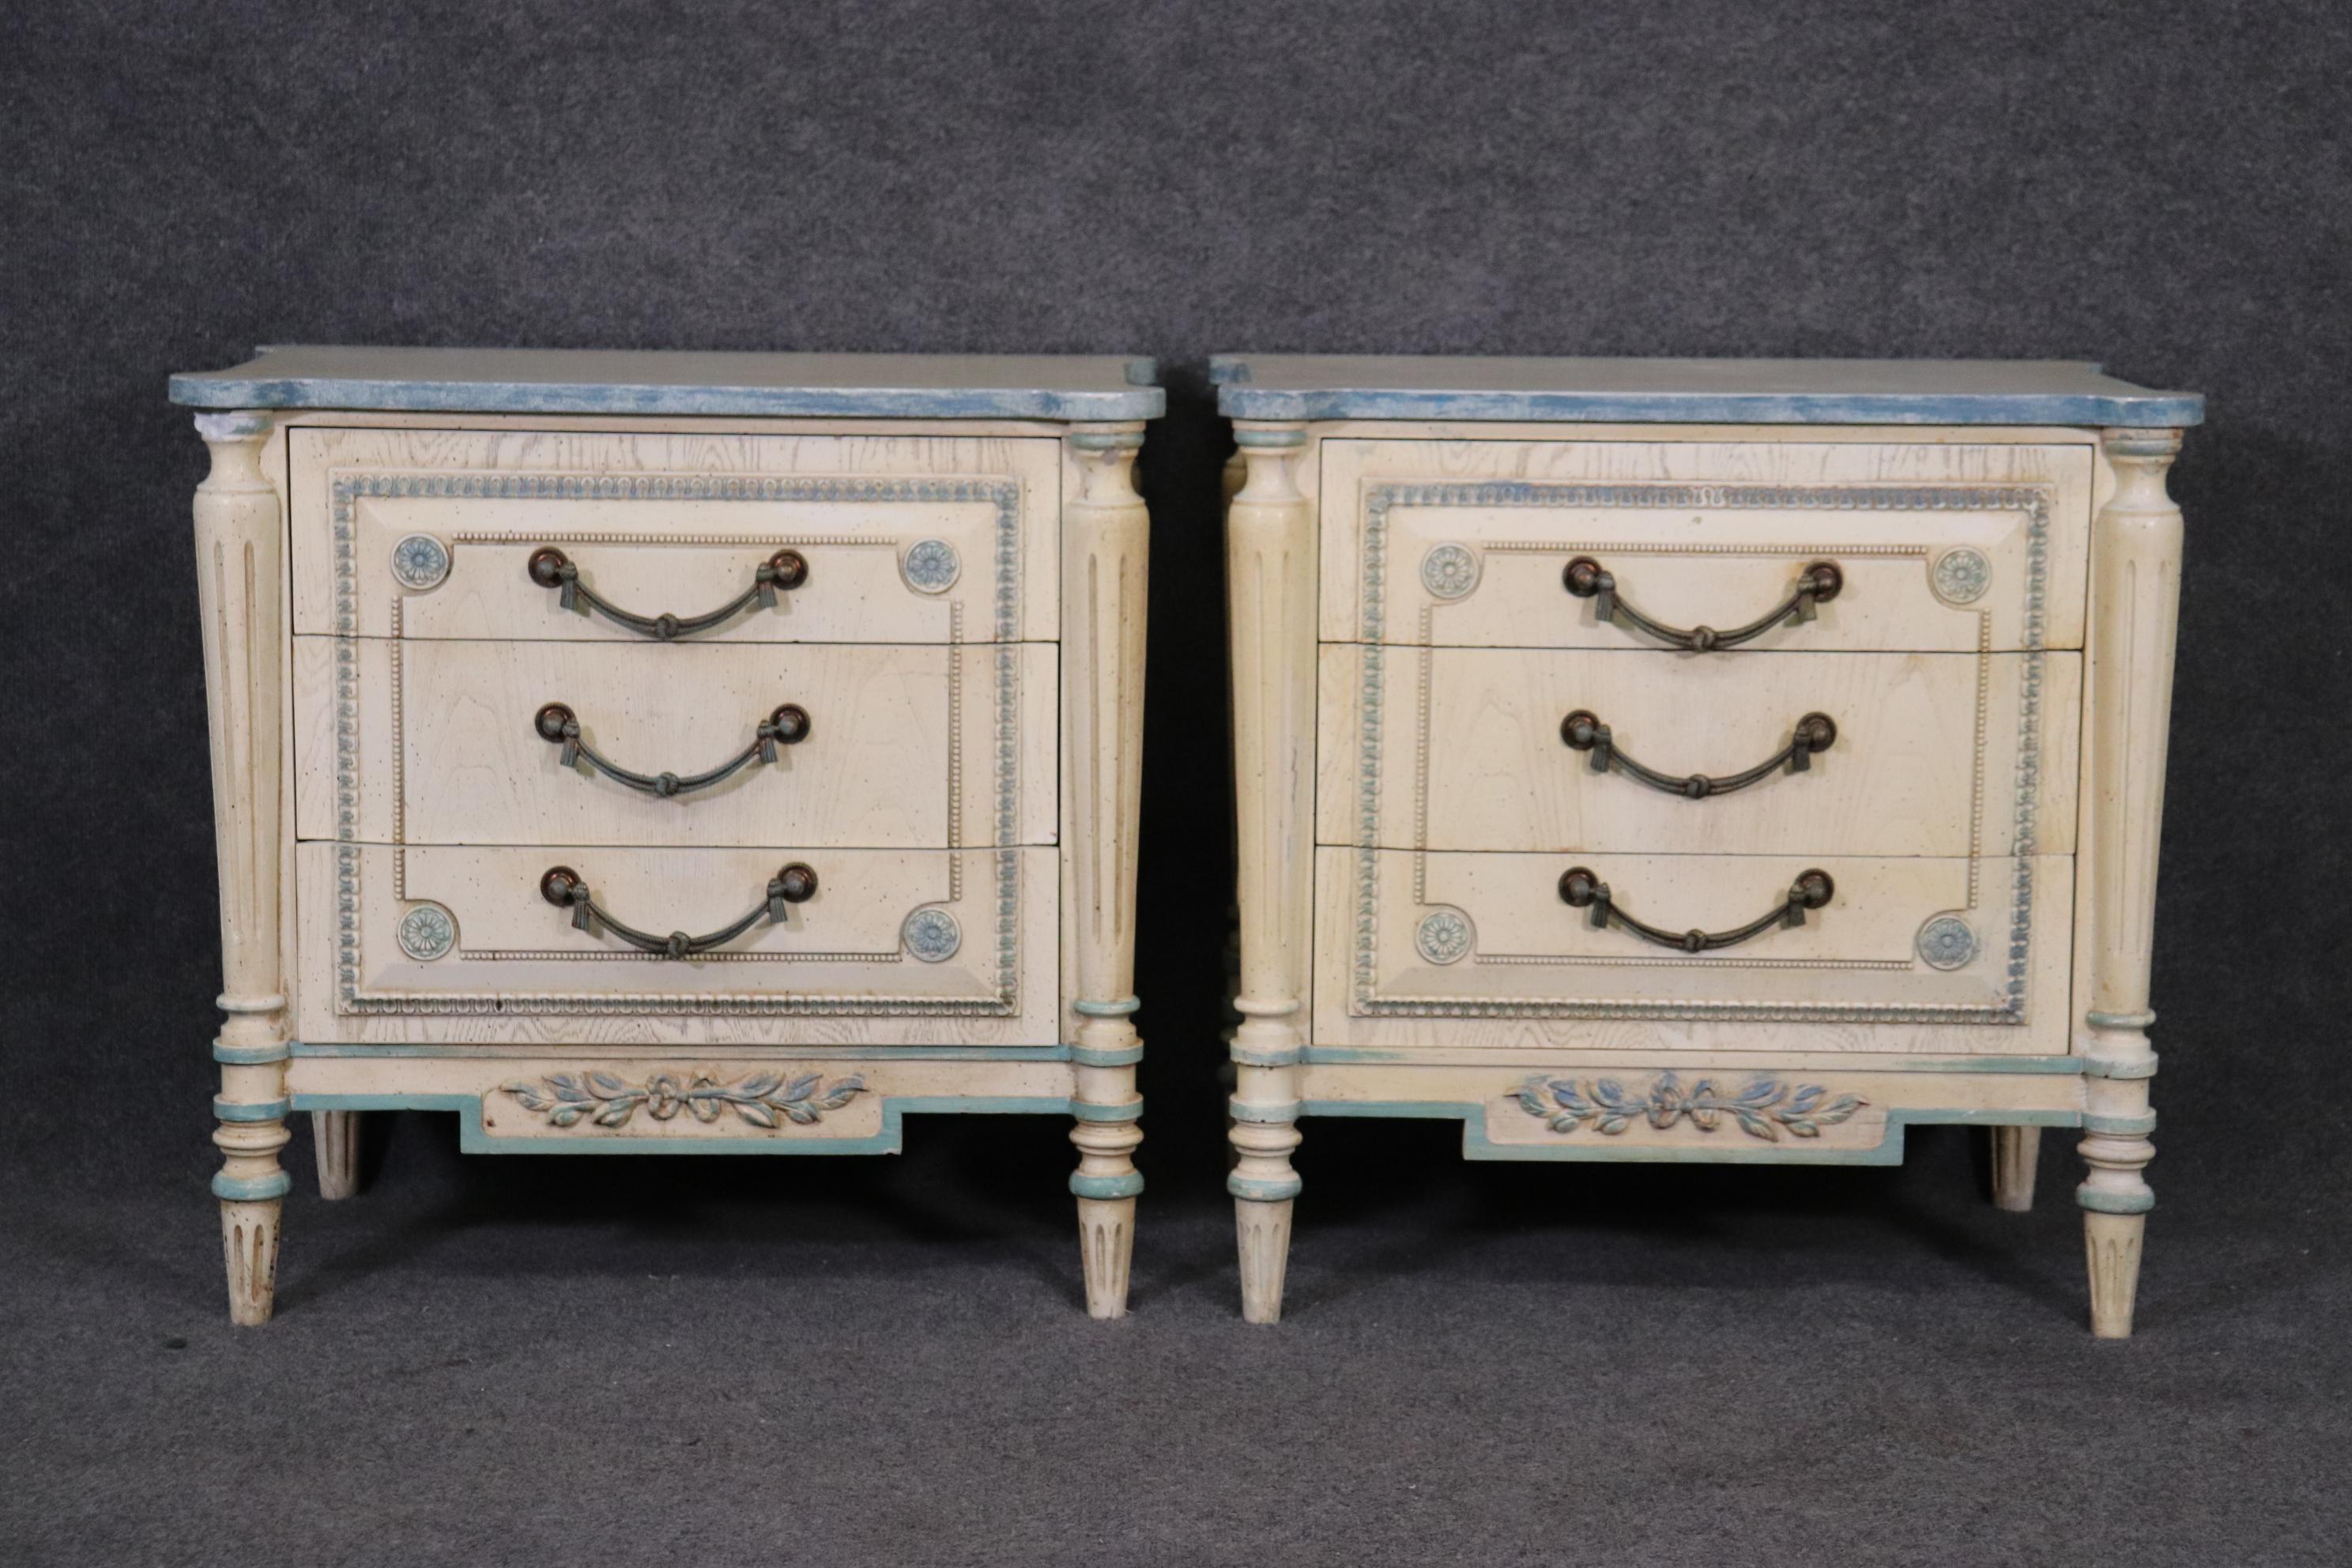 This is a beautiful pair of white and blue French stye nightstands. They are designed in the Directoire style and have classic lines and design. They measure 27 wide x 26 tall x 16 deep. They date to the 1960s era.